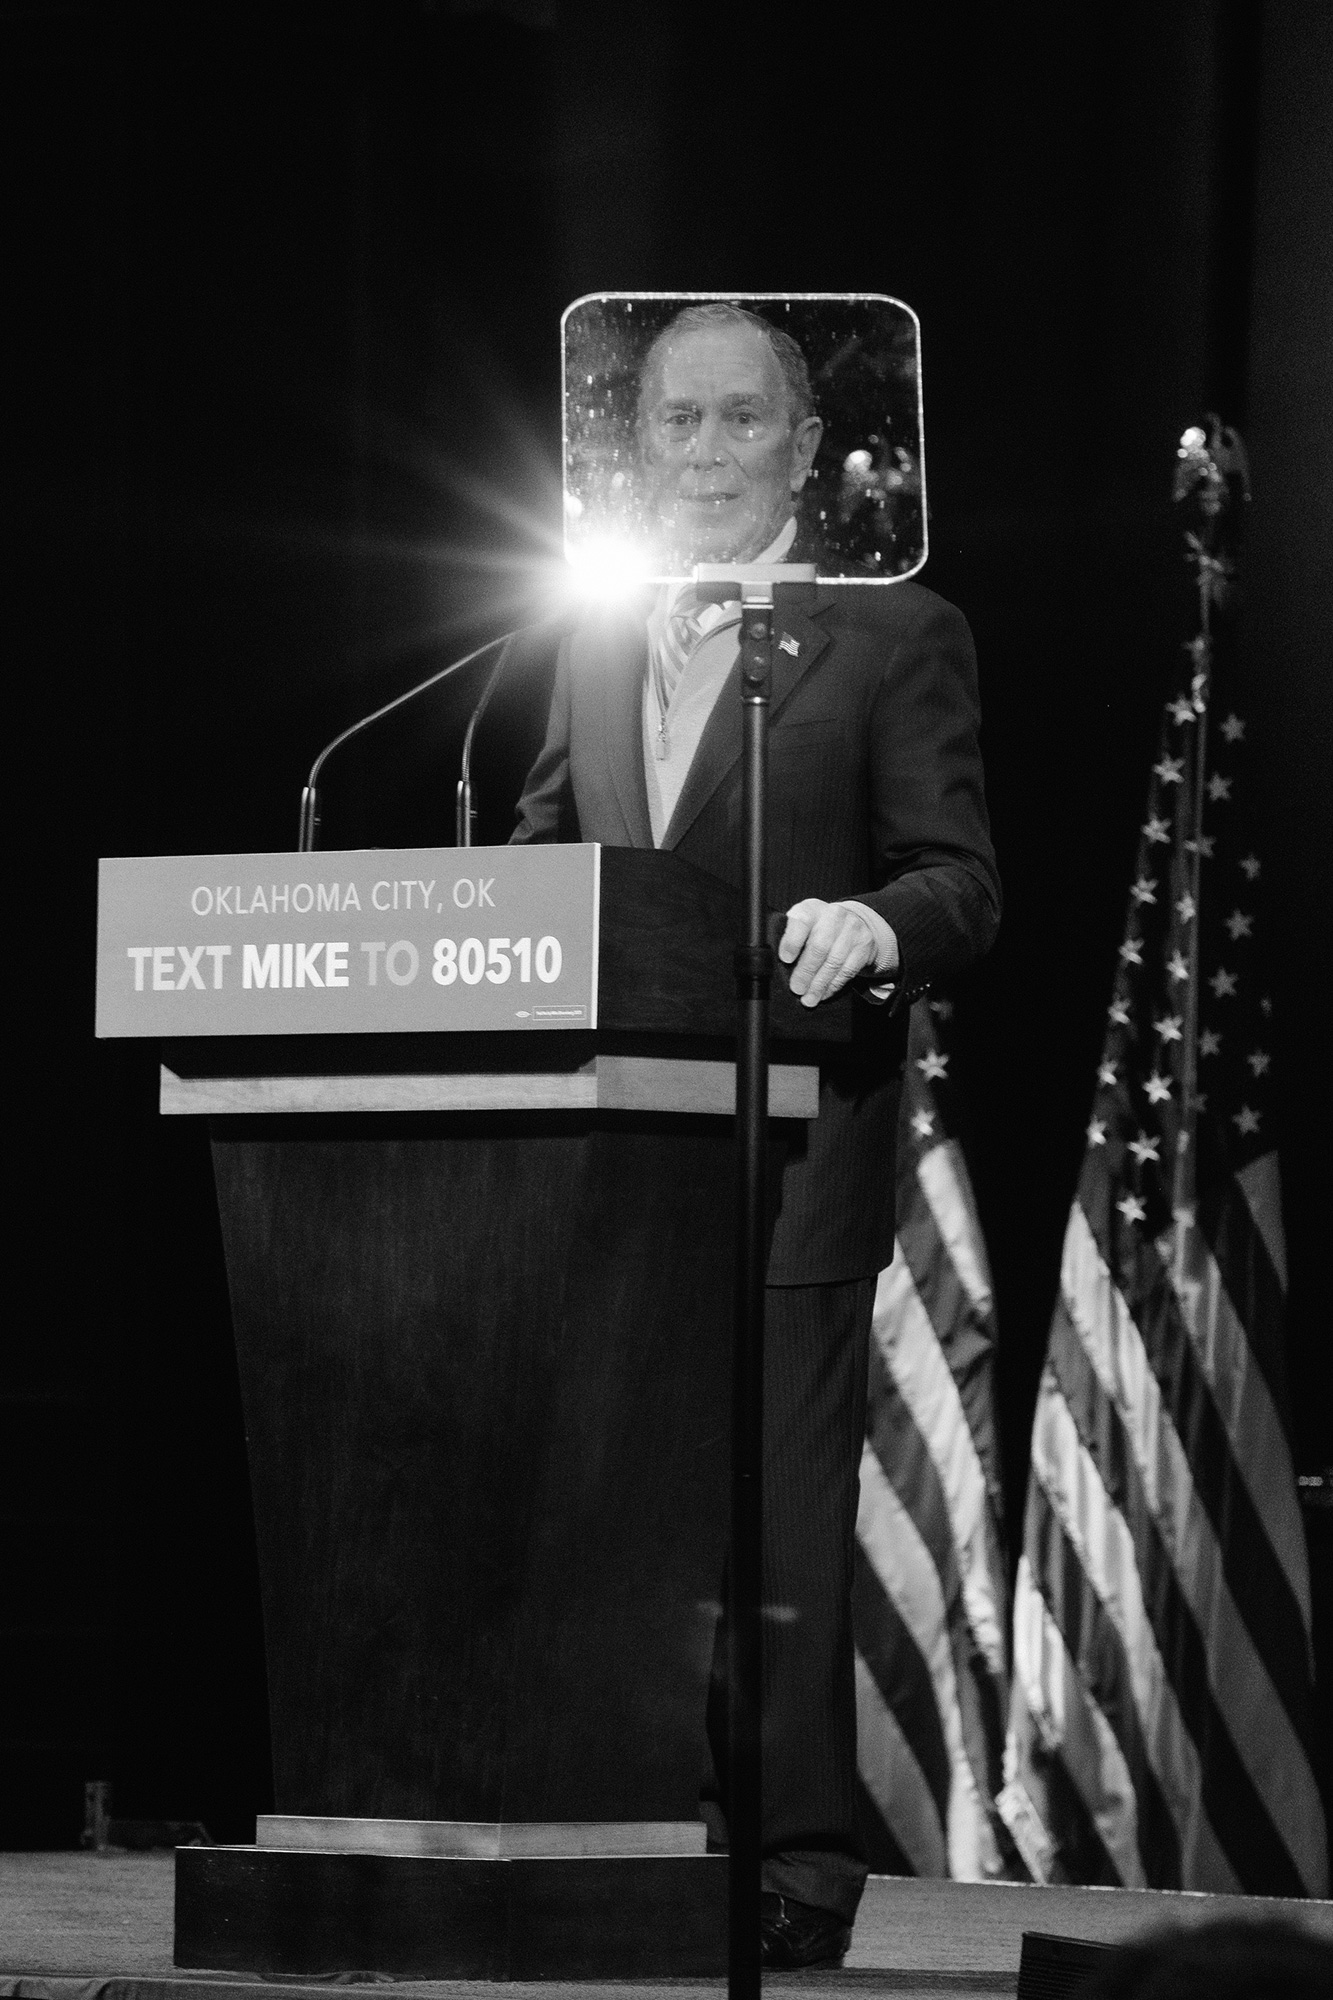 Bloomberg speaks at a rally in Oklahoma City on Feb. 27. (Christopher Lee for TIME)